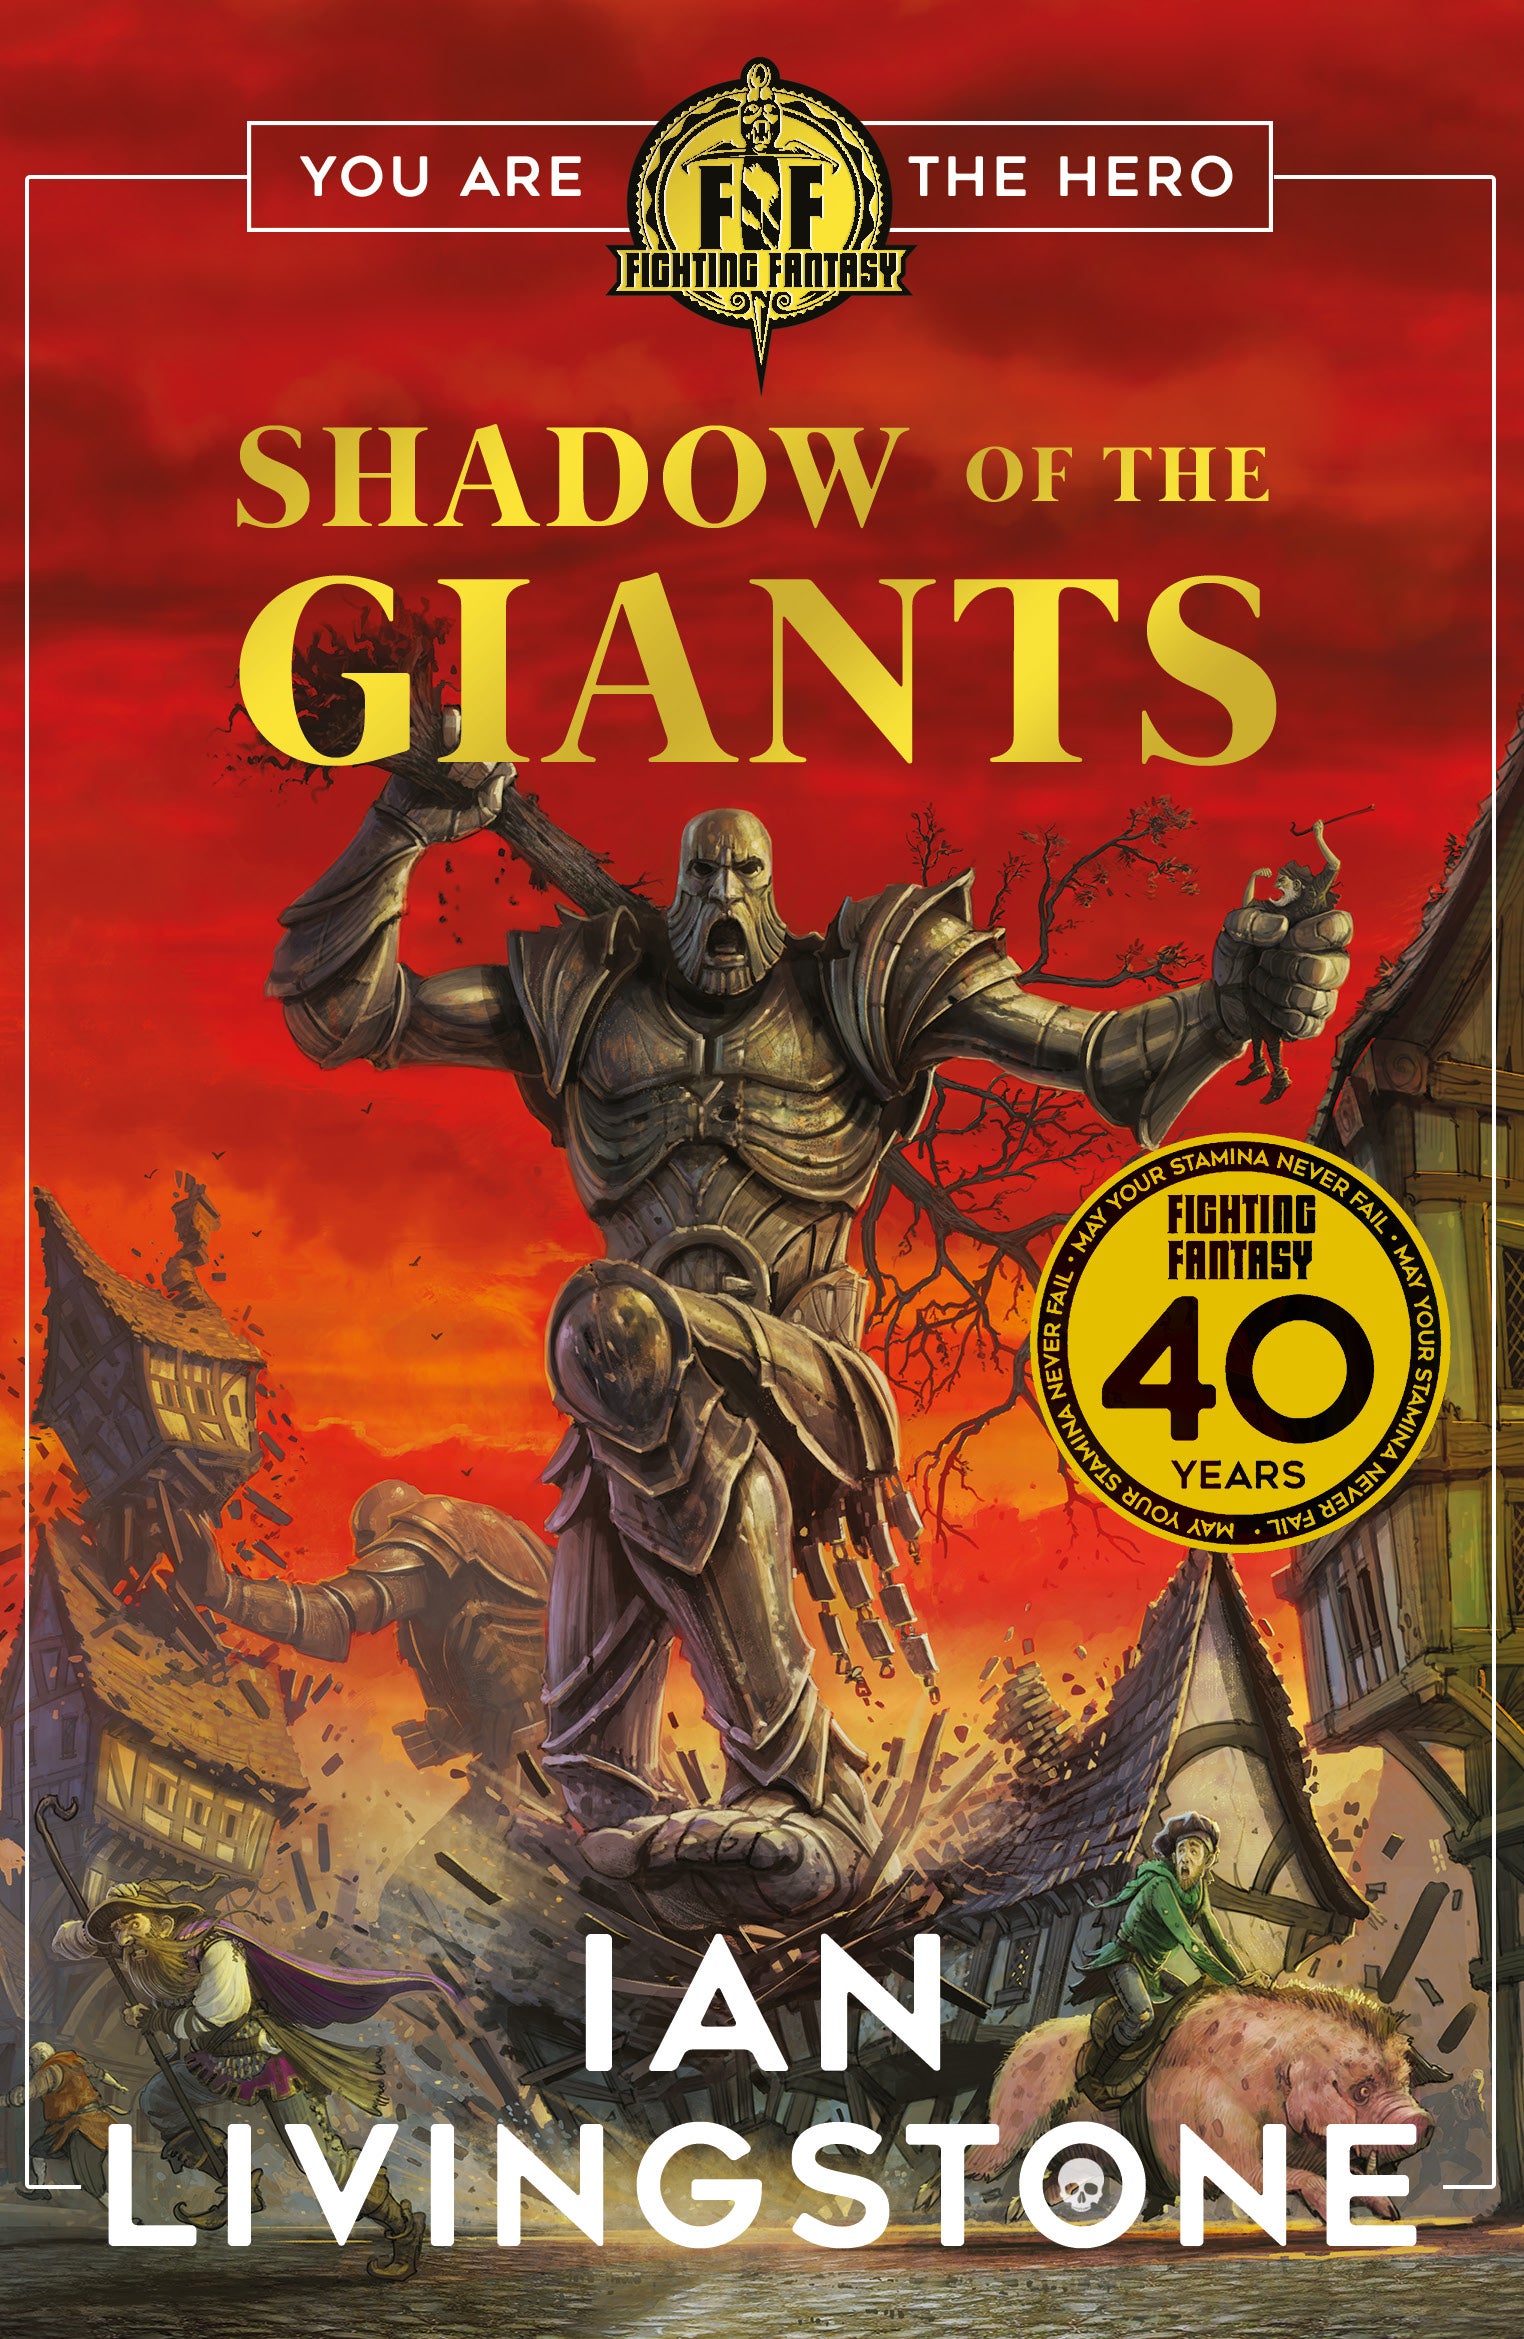 Ian Livingstone's new Fighting Fantasy book, Shadow of the Giants. Against a red background, a giant rampages.